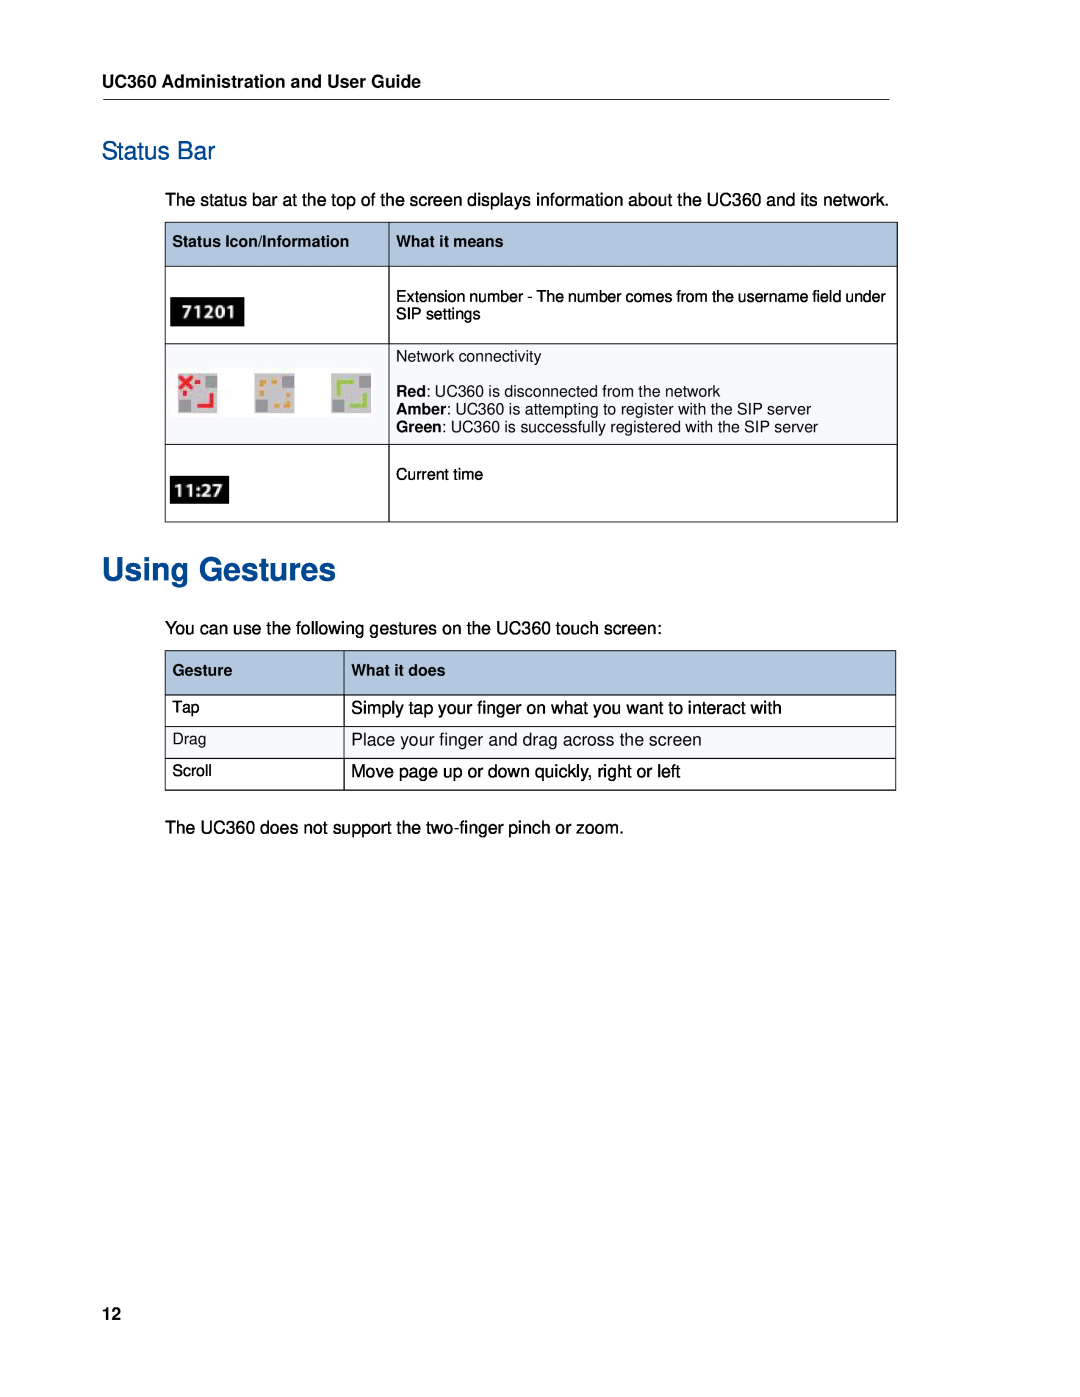 Mitel manual Using Gestures, Status Bar, UC360 Administration and User Guide 